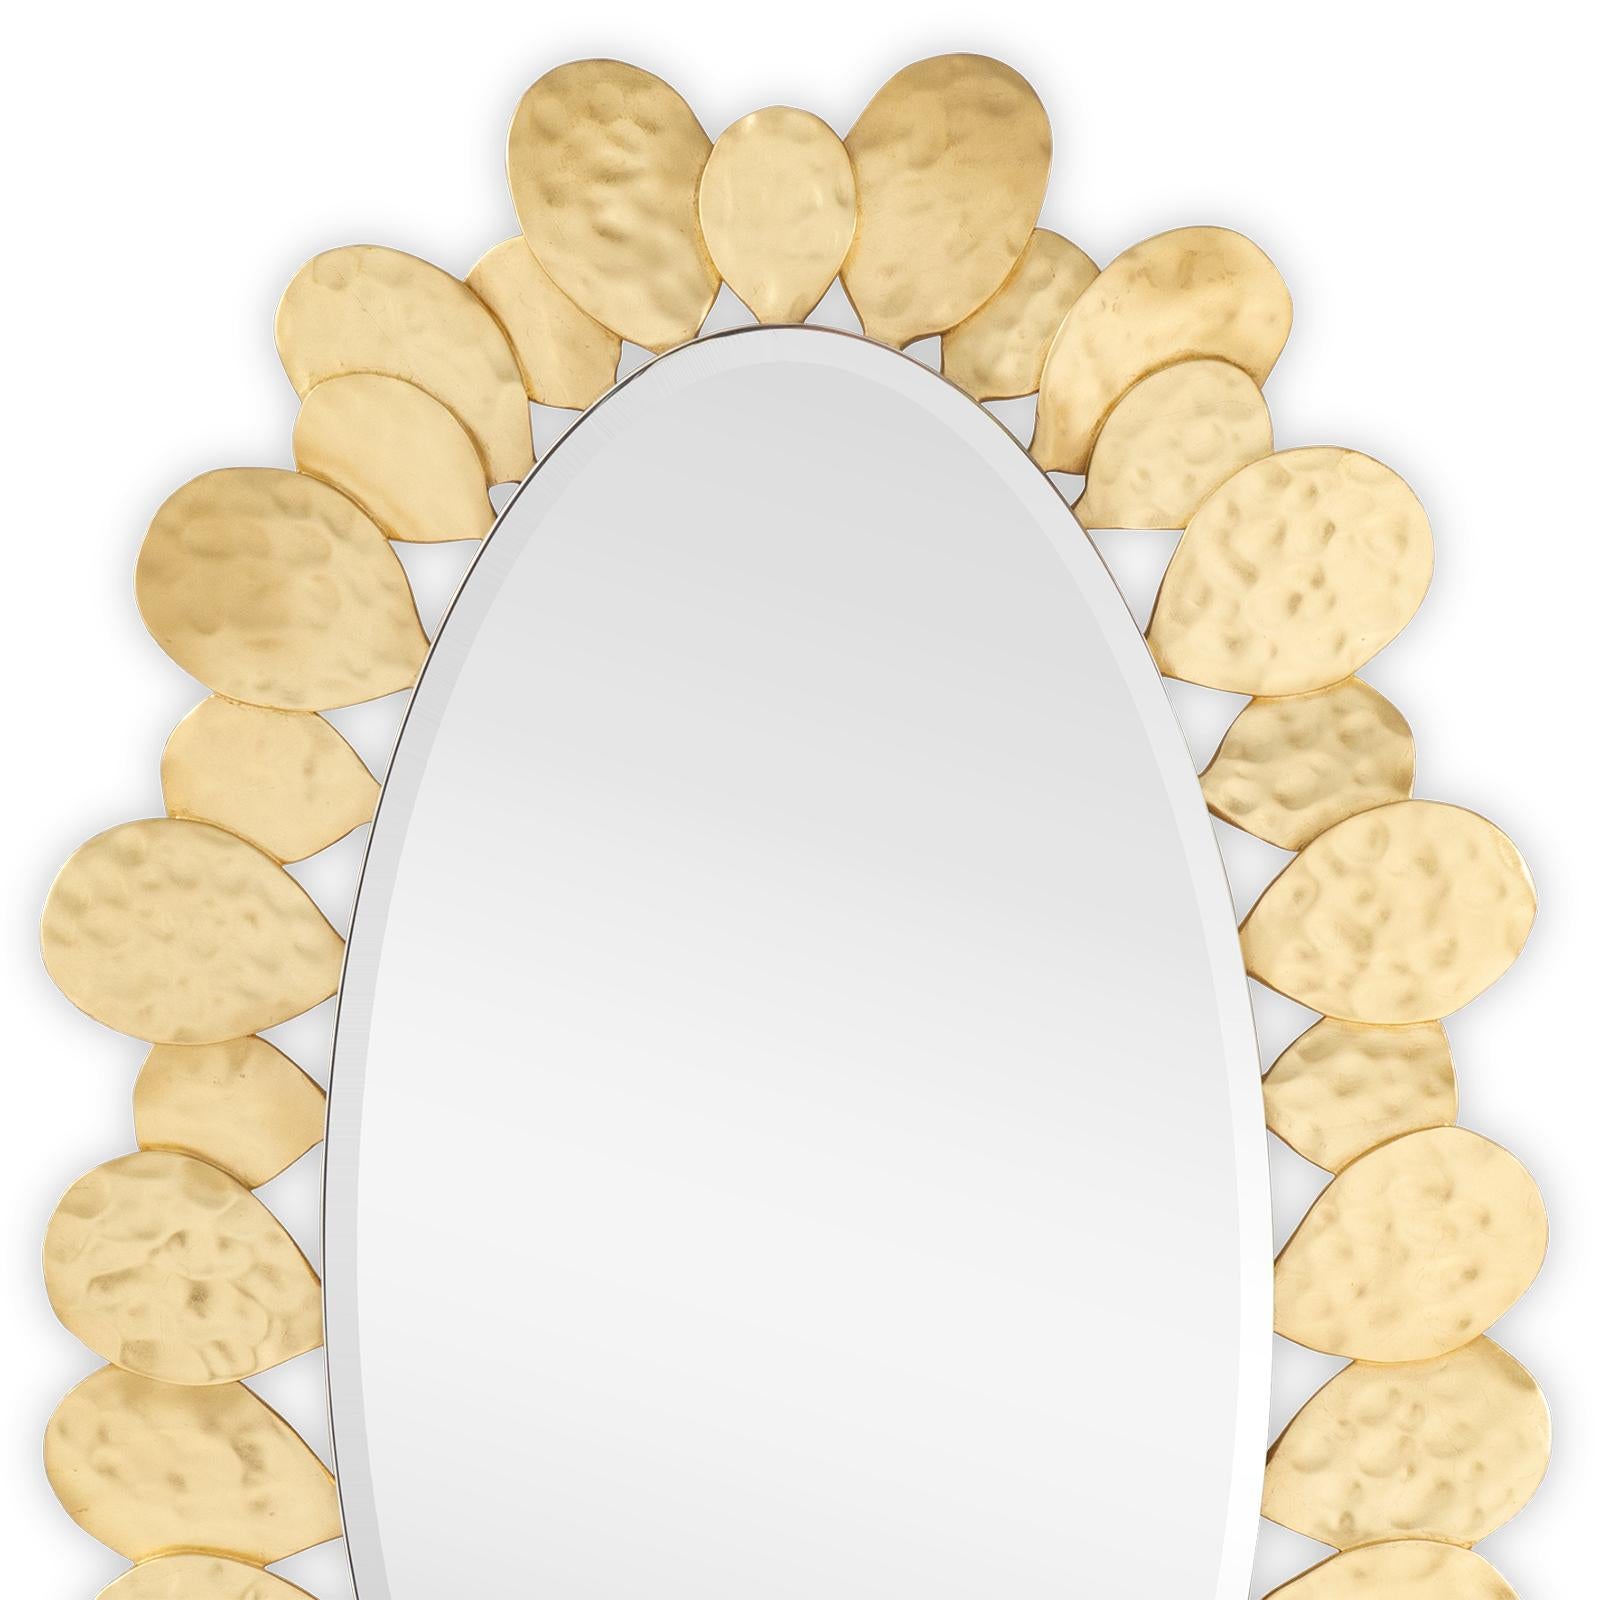 Mirror gold drops with frame structure in solid wood
in gold leaf paint finish. With oval bevelled edge glass mirror.
Also available in silver leaf paint finish on request.
Available in :
L 66 x D 05 x H 105cm, price: 3650,00€.
L 82 x D 05 x H